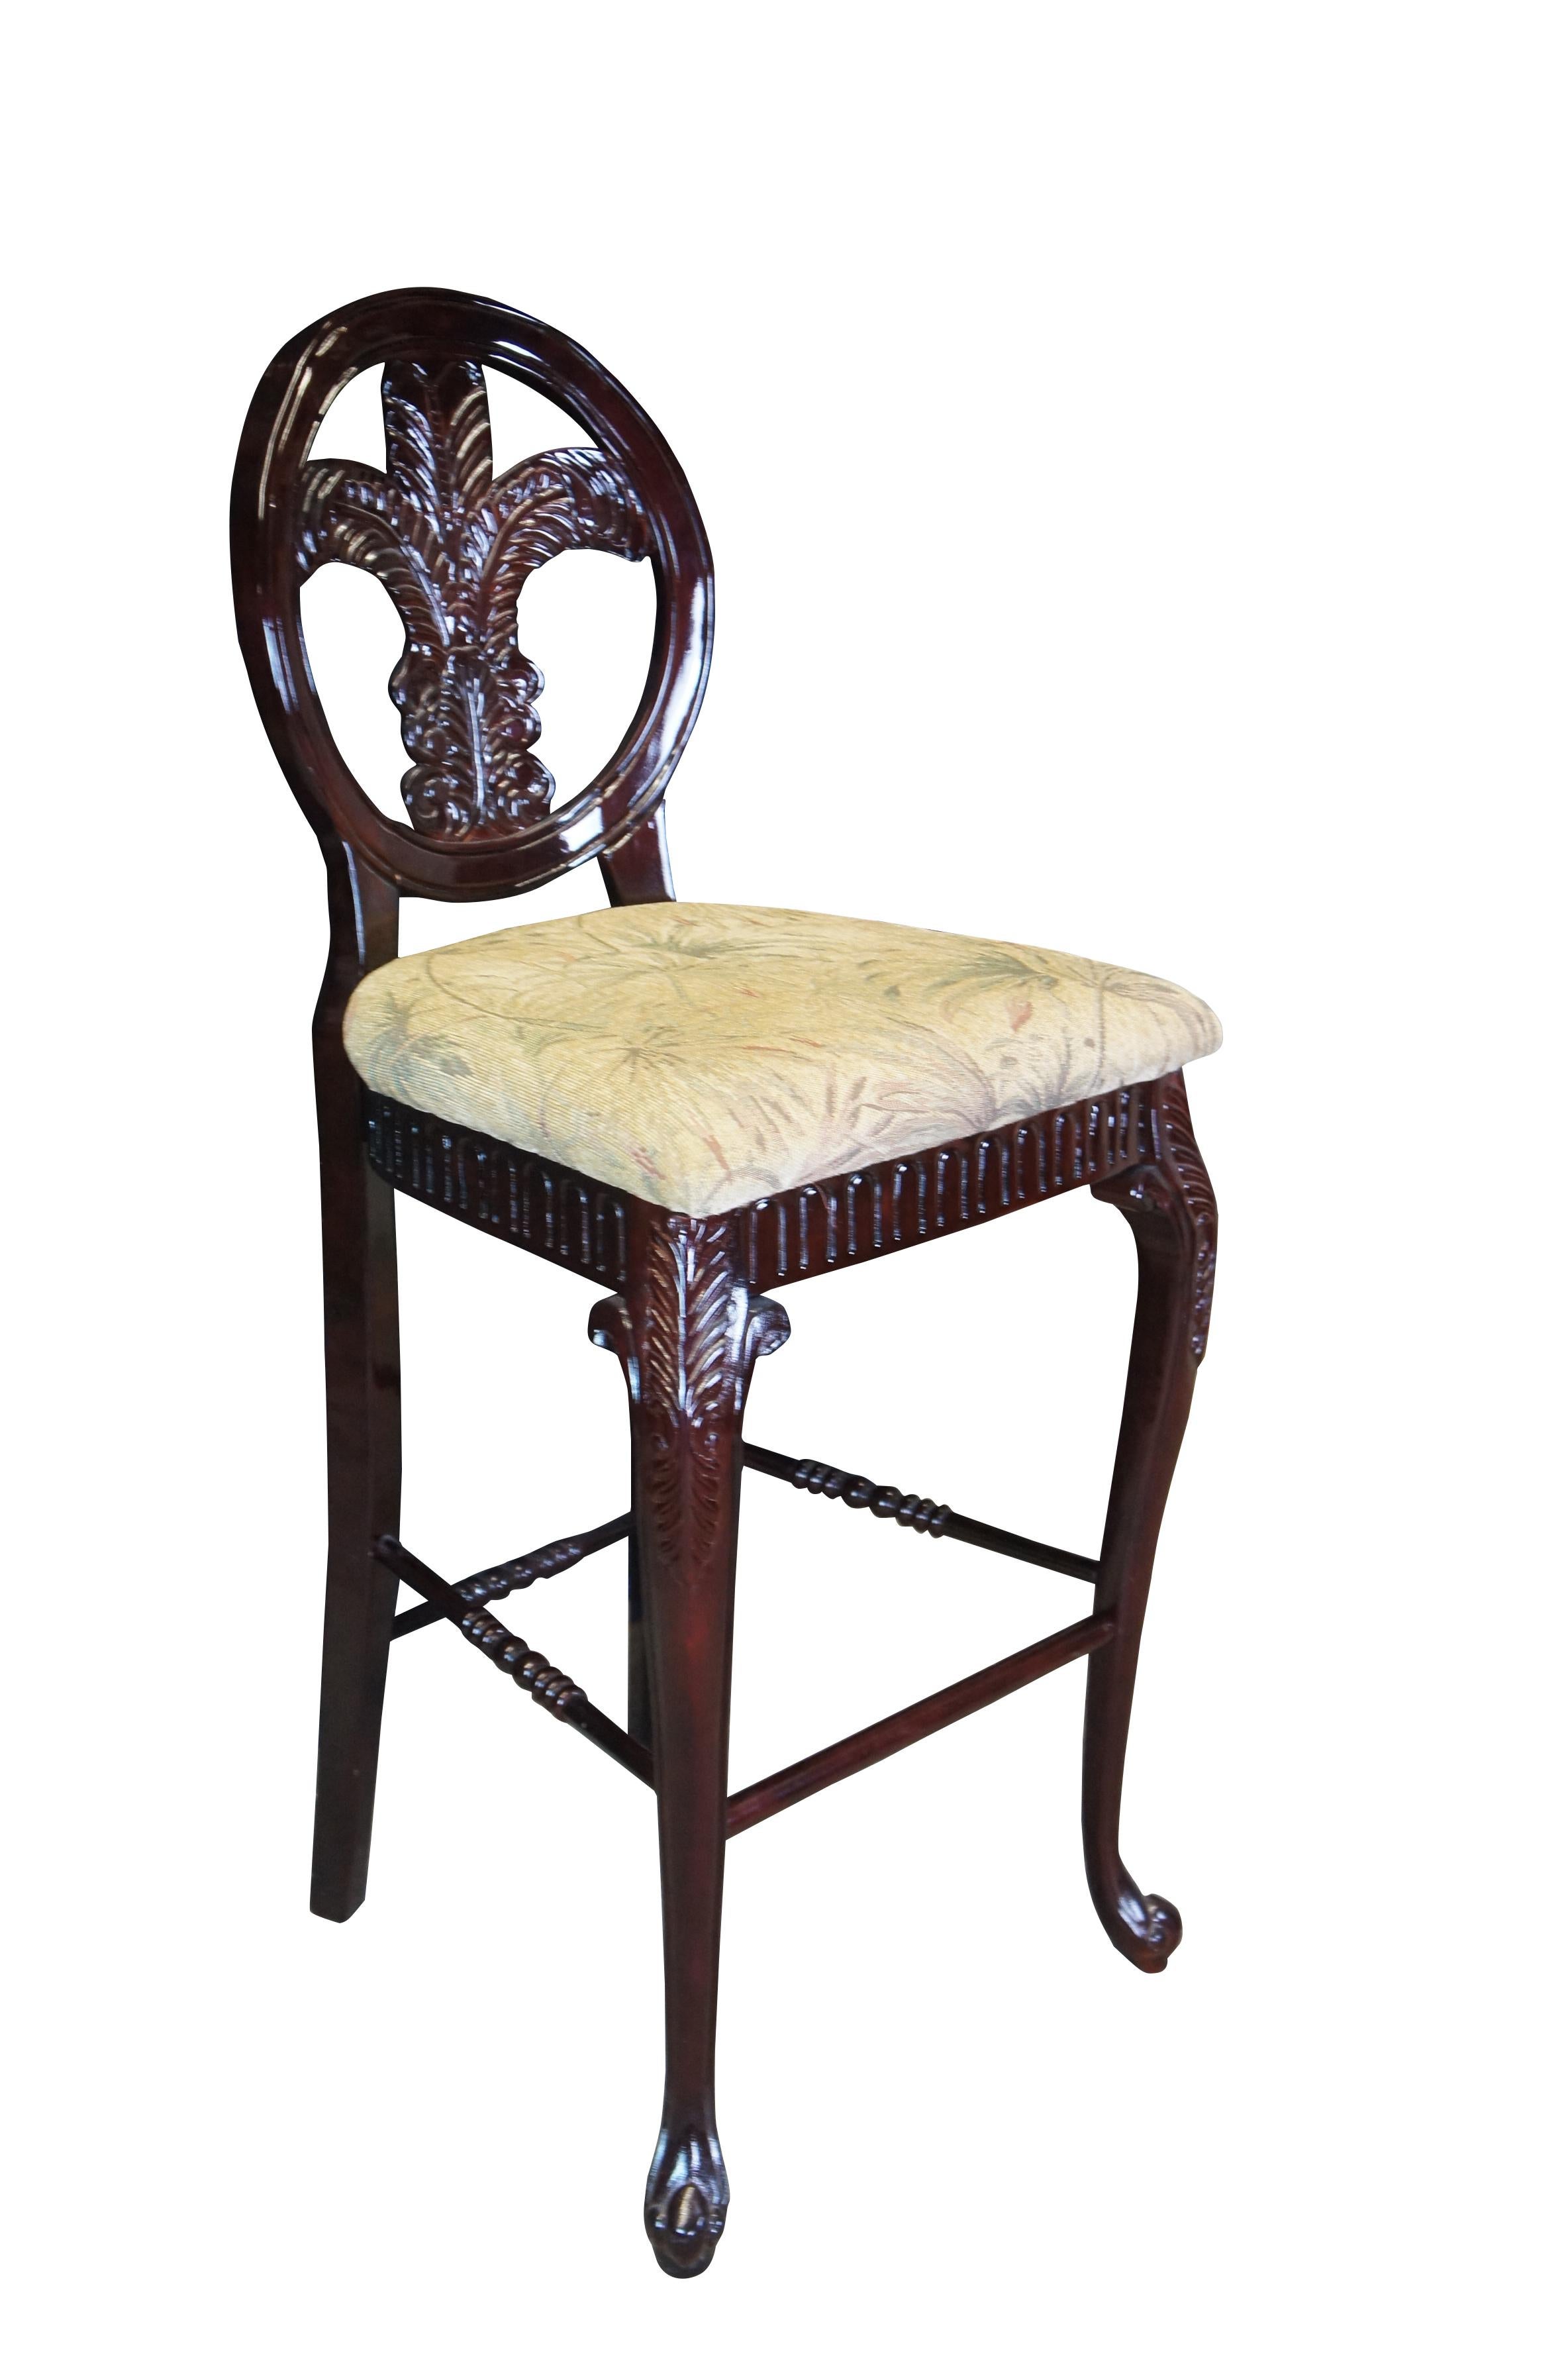 3 Pulaski Foxcroft Bar Height Stools Prince of Wales Carved Plume In Good Condition For Sale In Dayton, OH